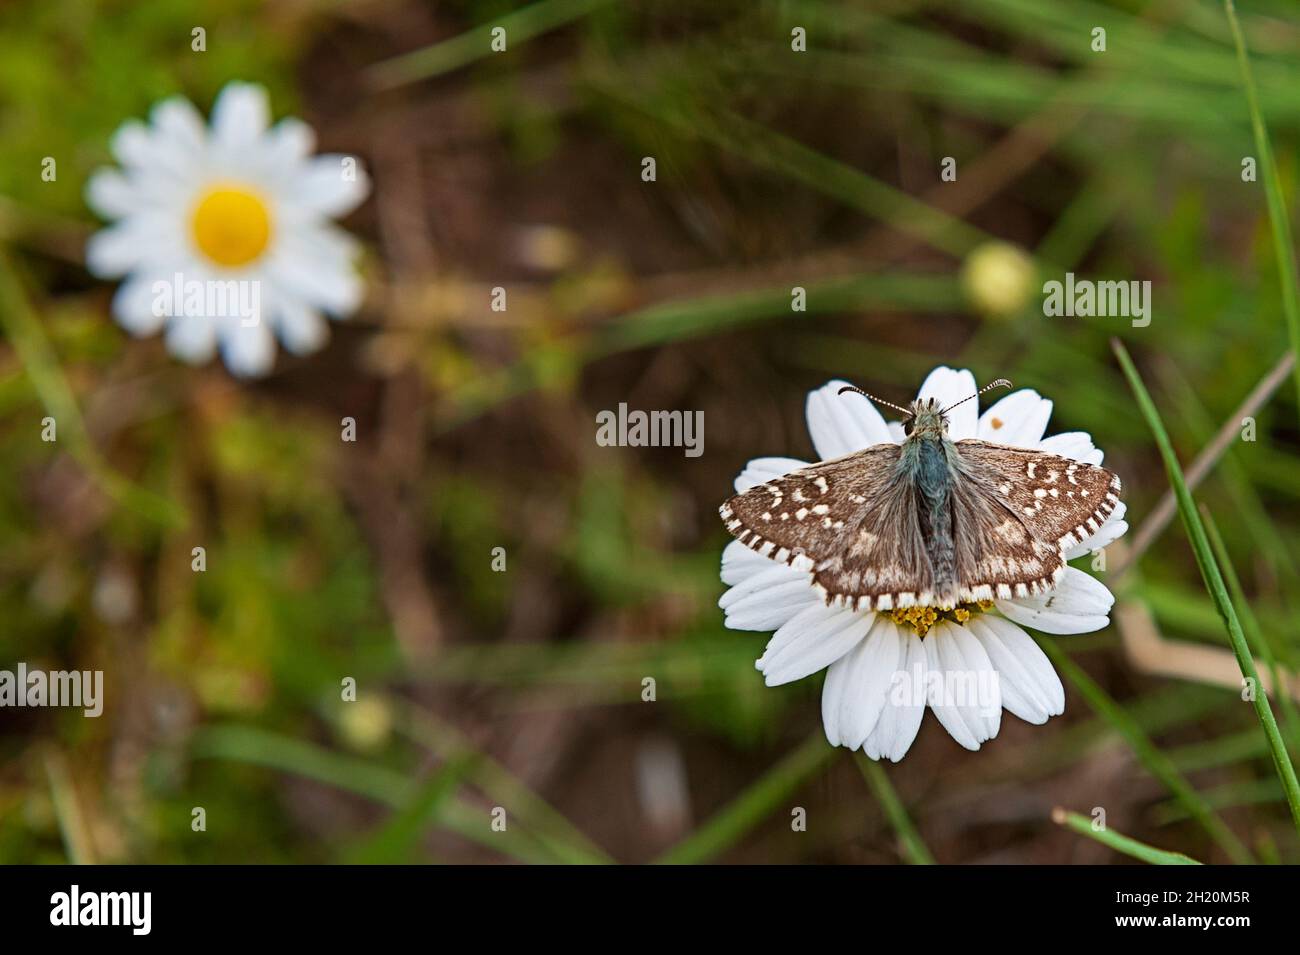 Day butterfly perched on flower, Pyrgus alveus. Stock Photo